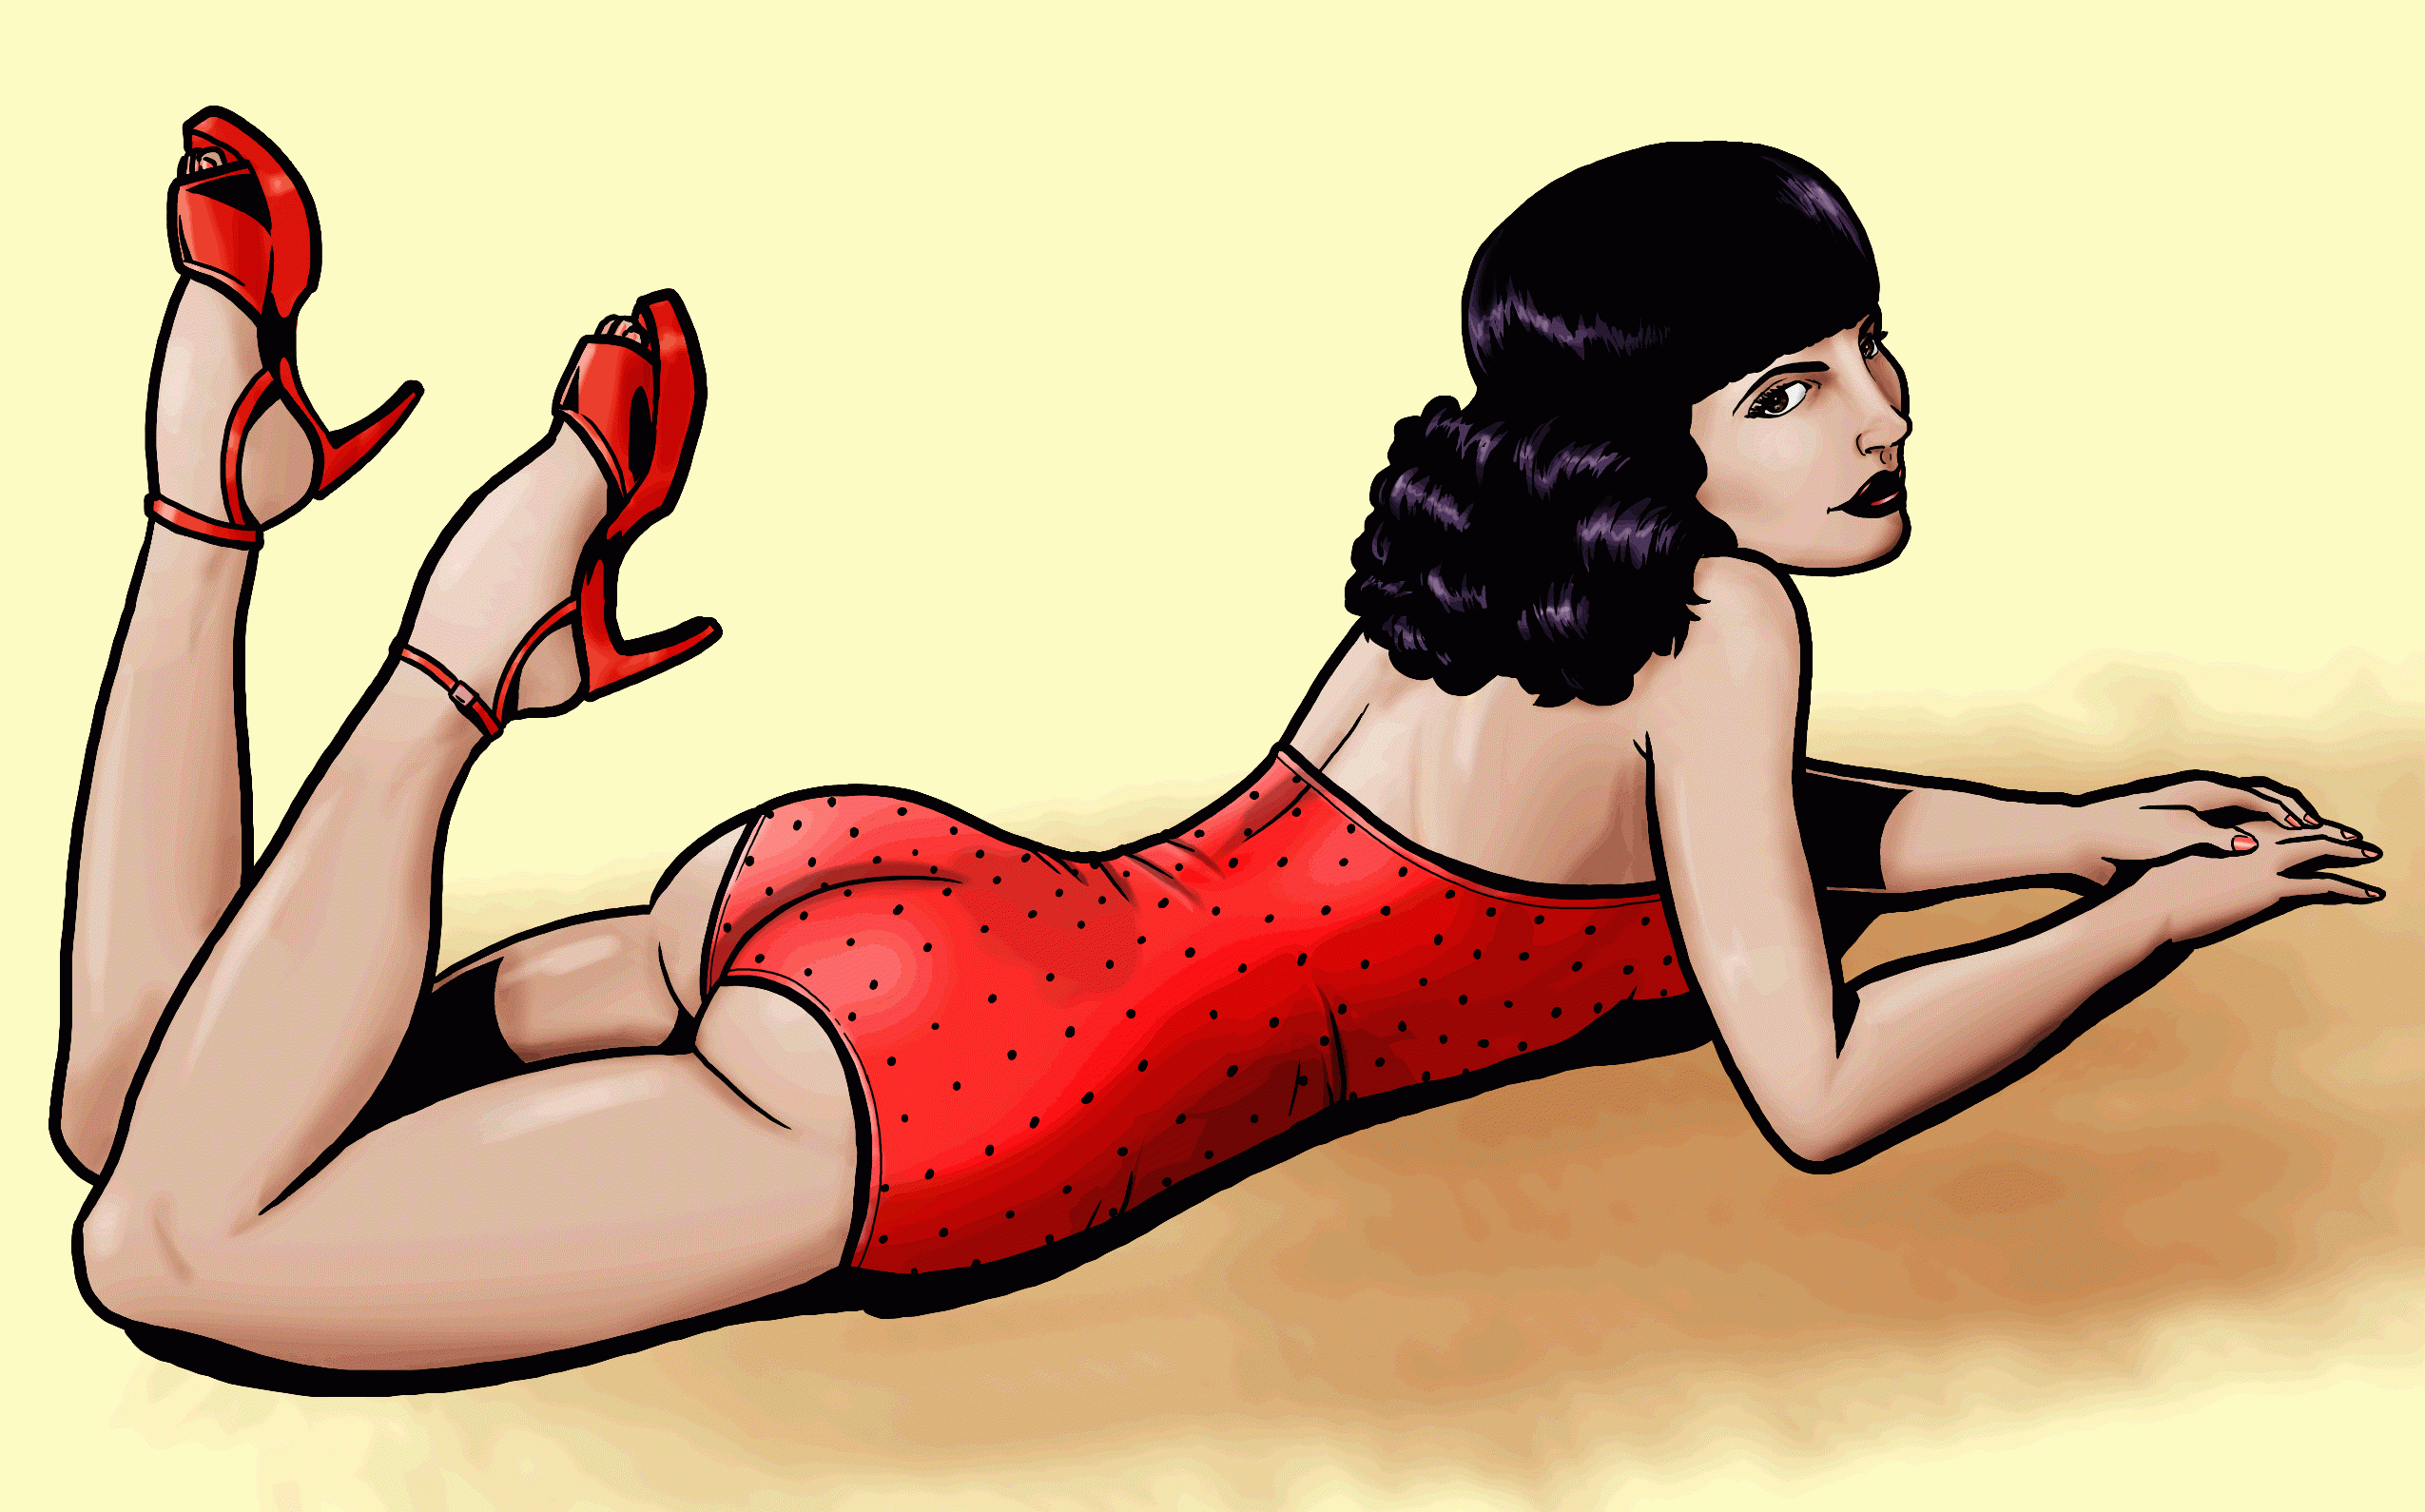 how-to-draw-pin-ups-pin-up-girls_1_000000014993_5